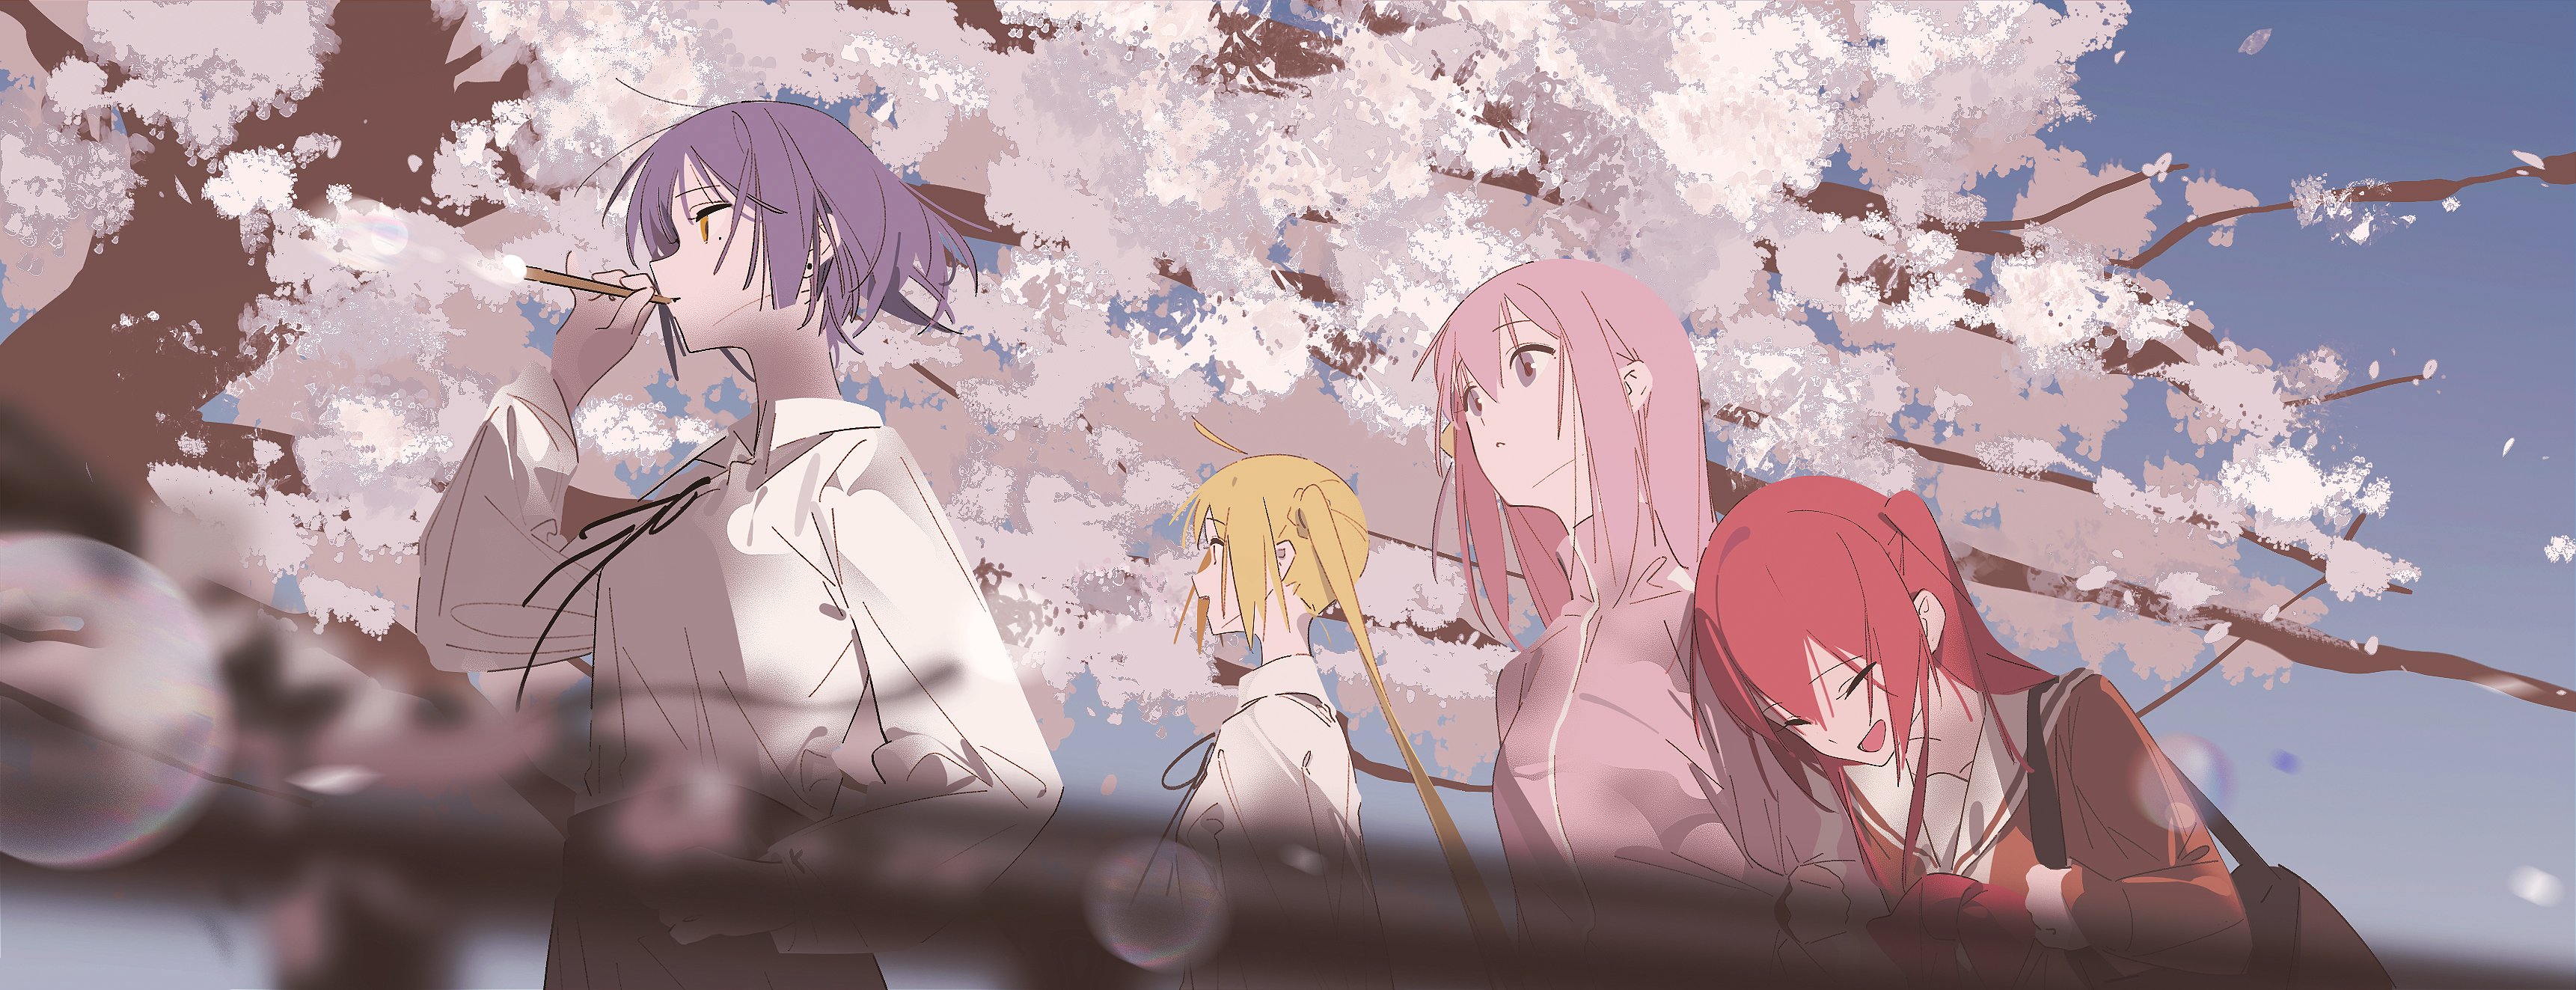 BOCCHi THE ROCK Cherry Blossom Ultrawide Anime Girls Flowers Closed Eyes Long Hair Bubbles Gotou Hit 3443x1323